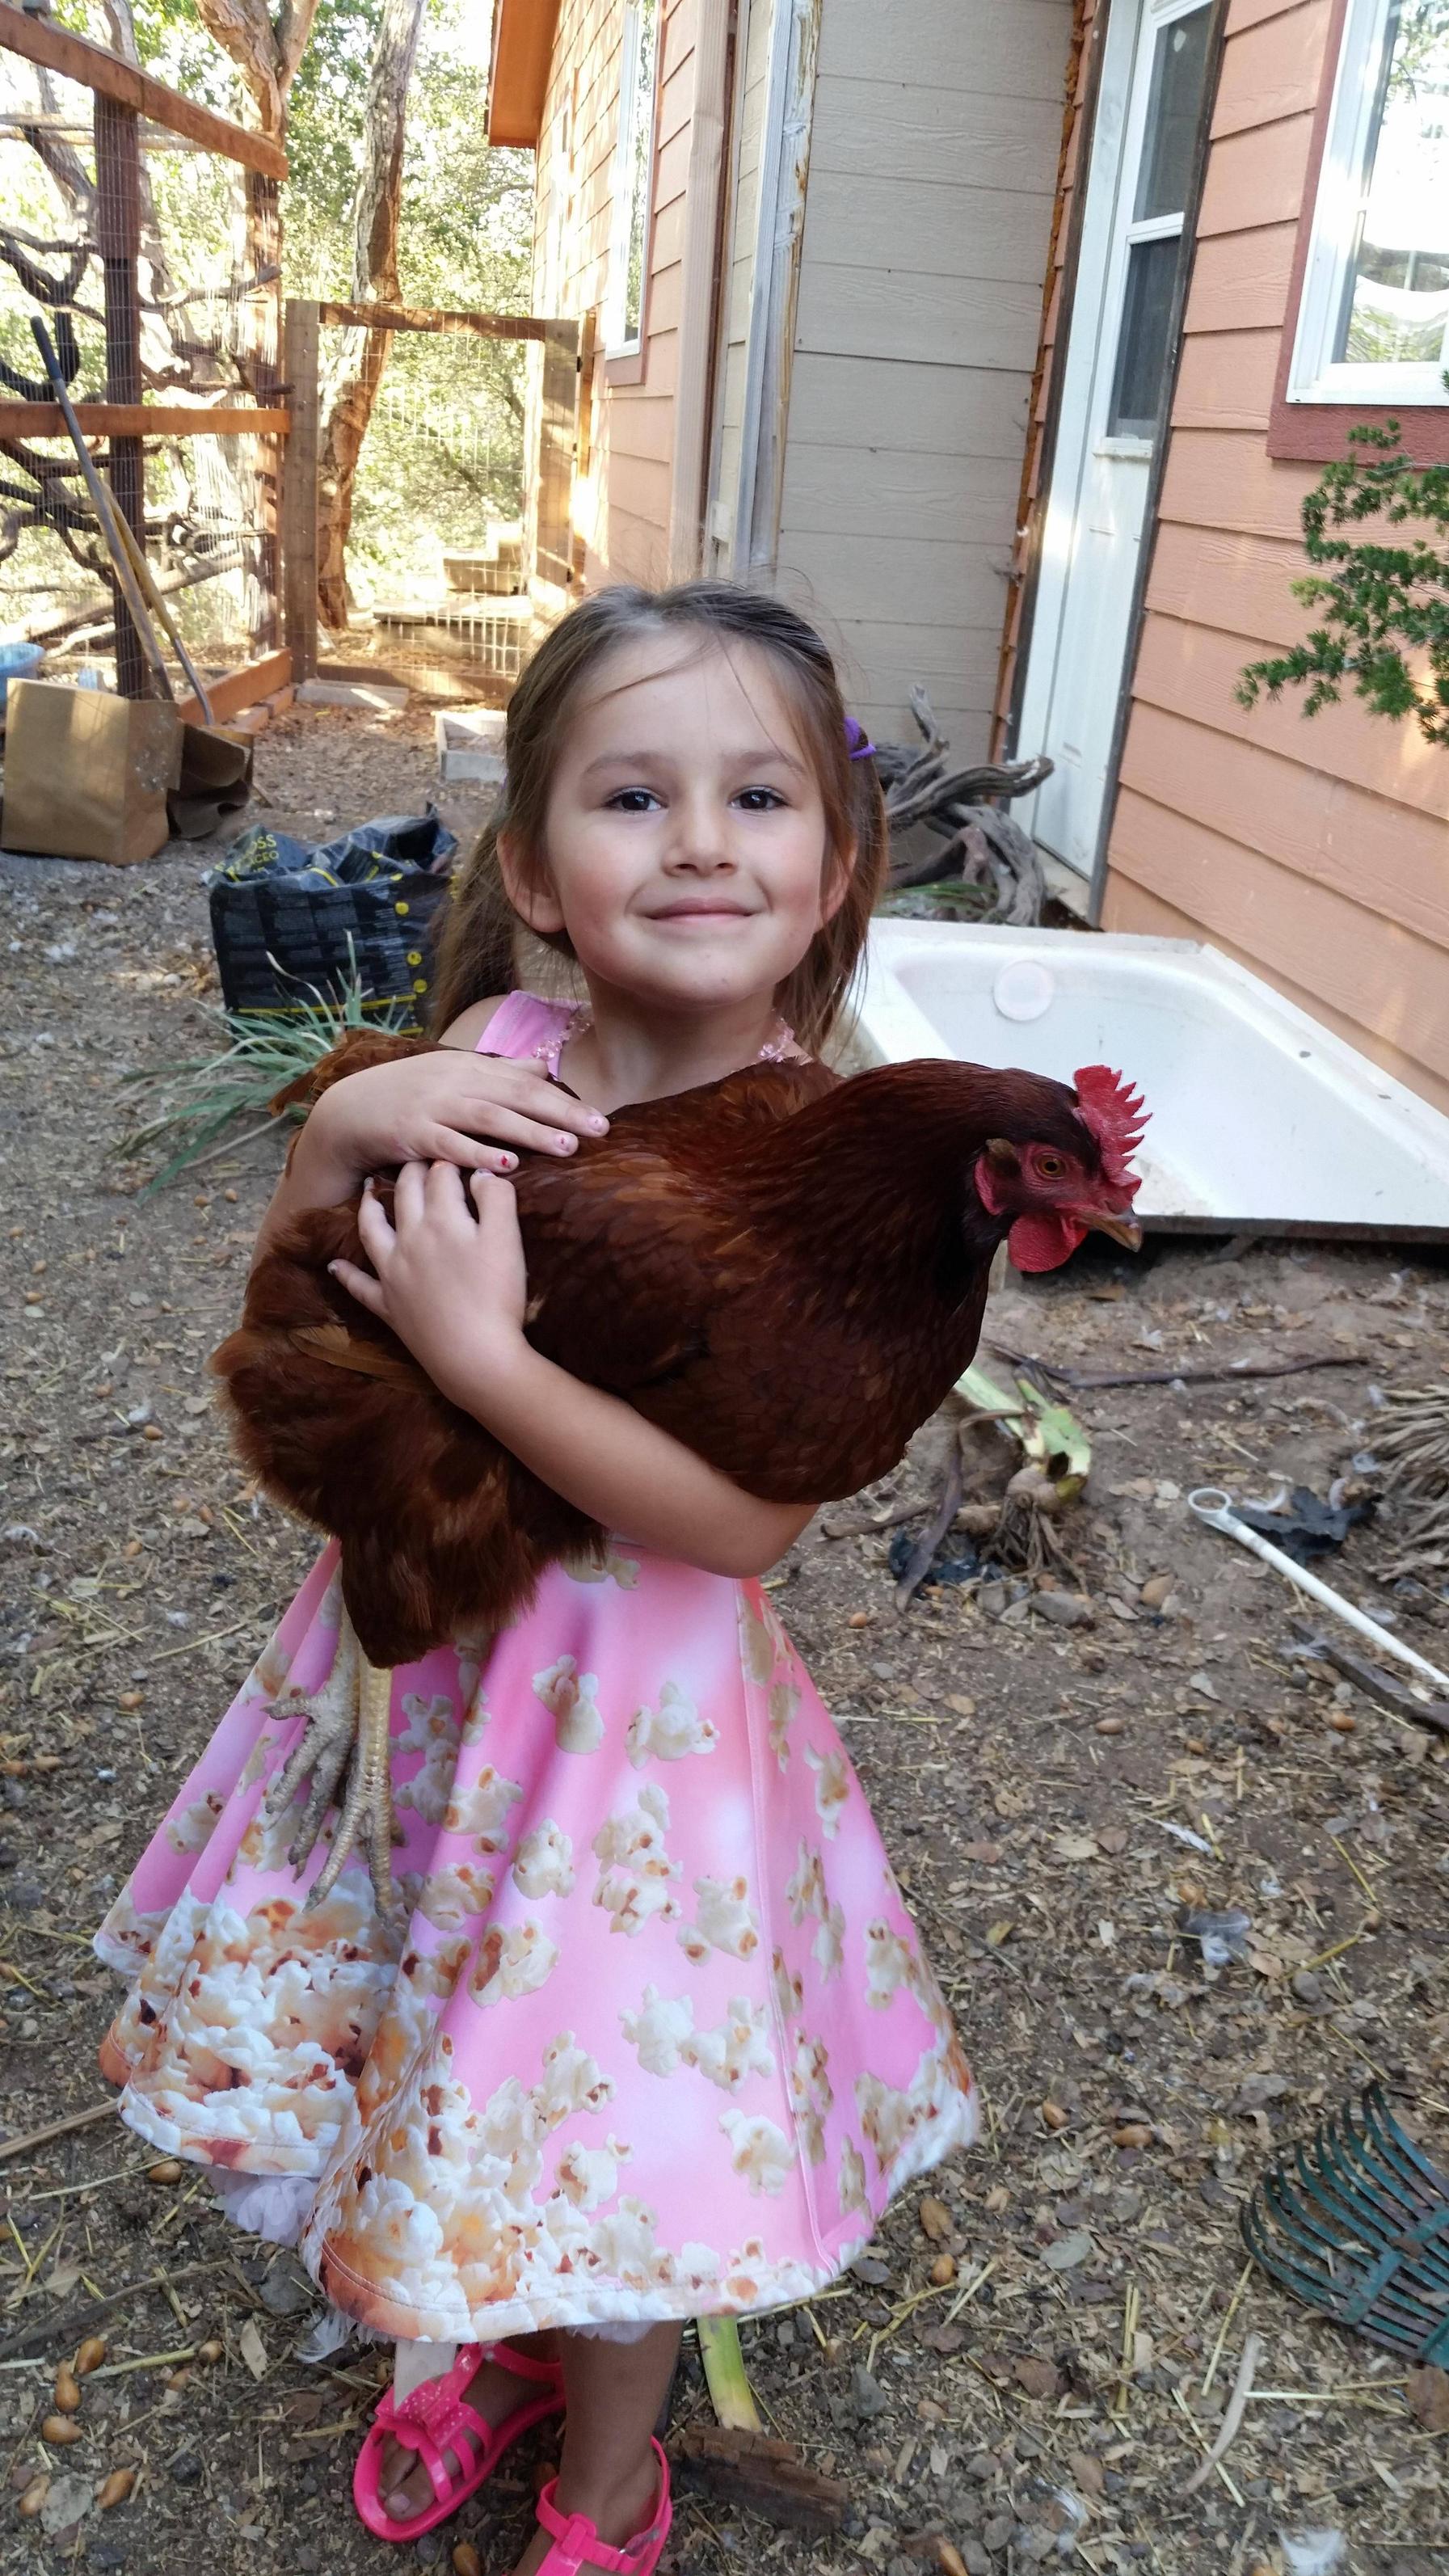 Just a girl and her chicken - Imgur